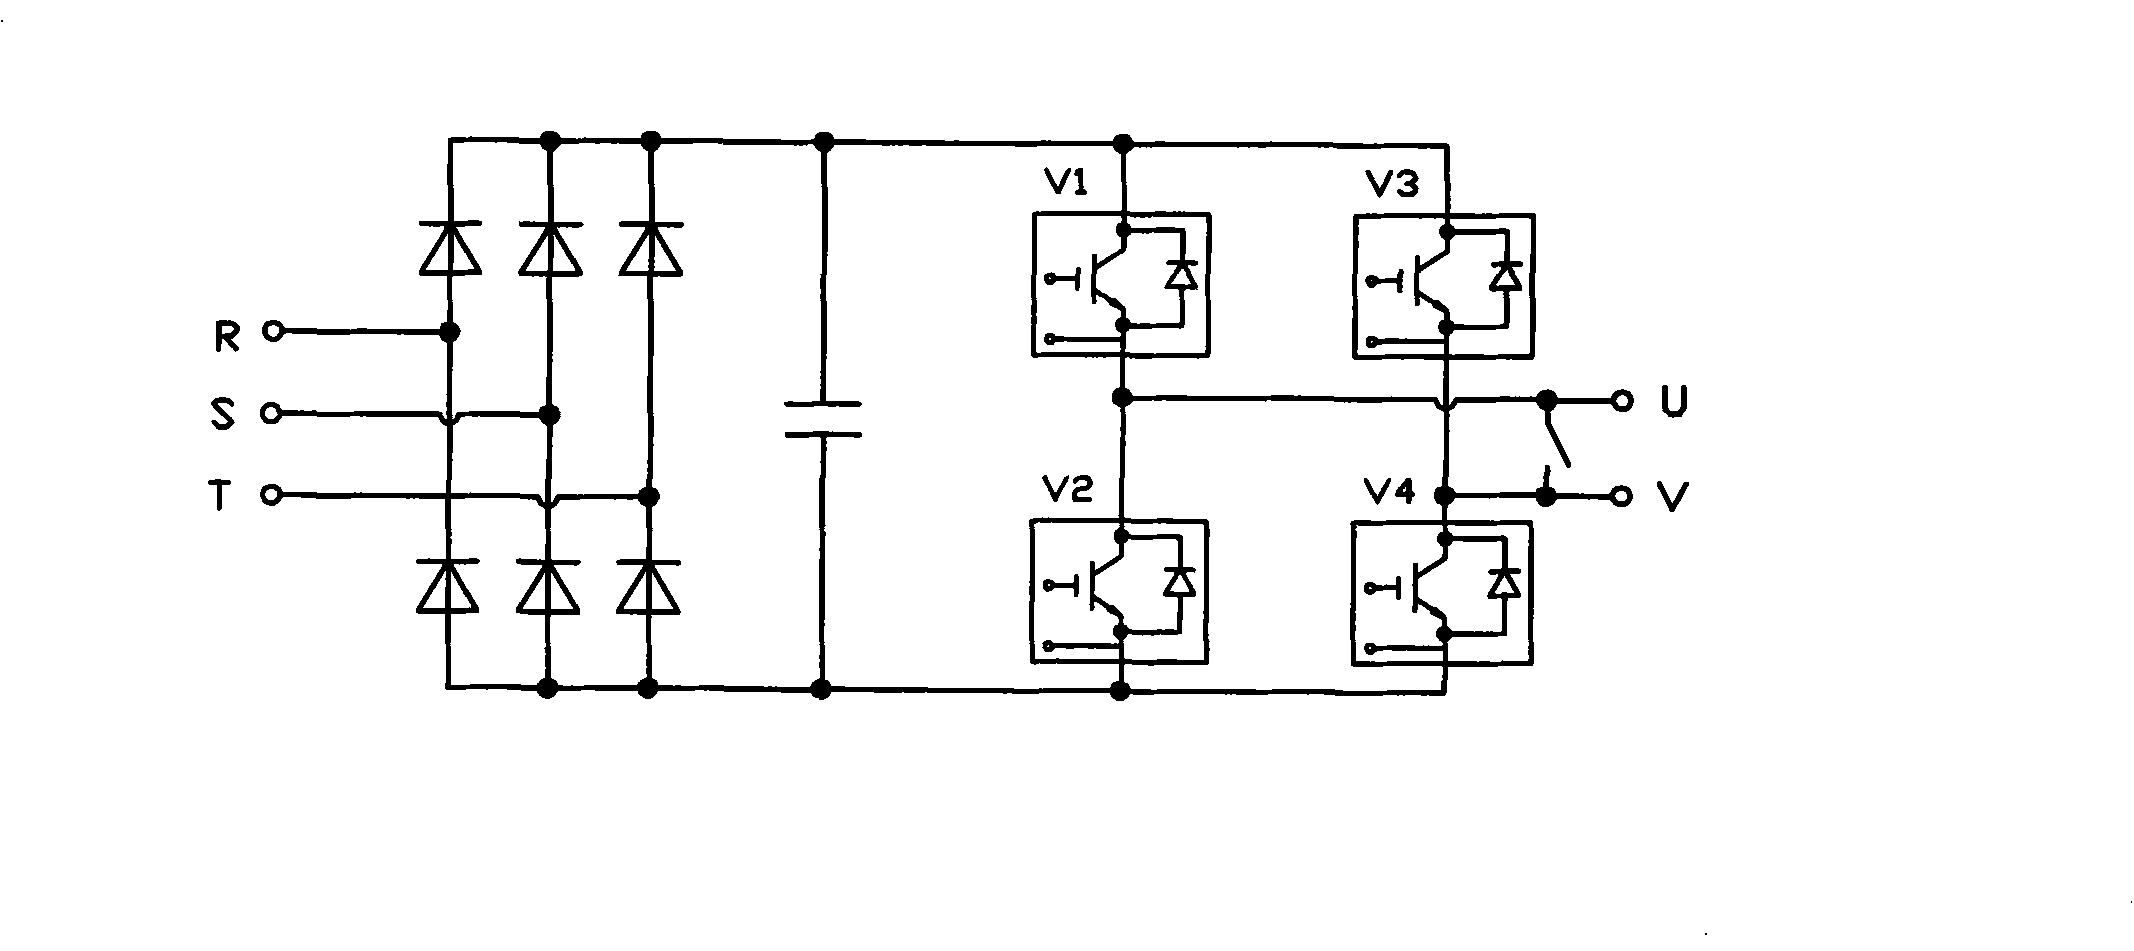 N+1 redundancy high-voltage frequency converter with double standby power units and control method